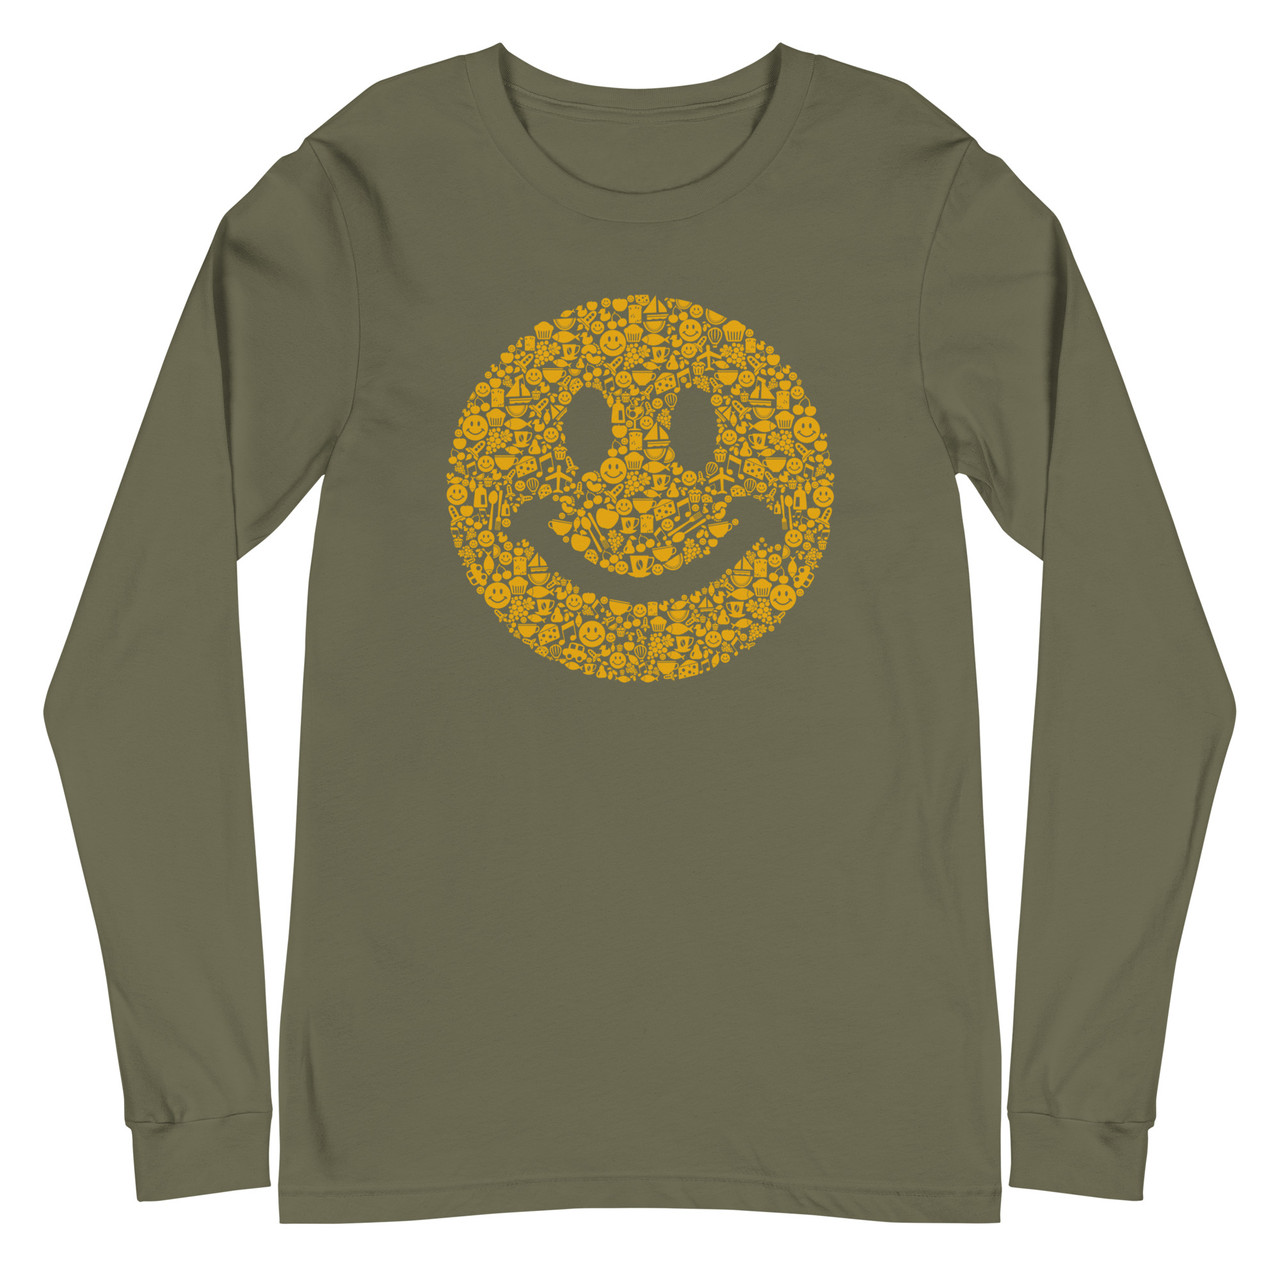 Smile Within A Smile Unisex Long Sleeve Tee - Bella + Canvas 3501 